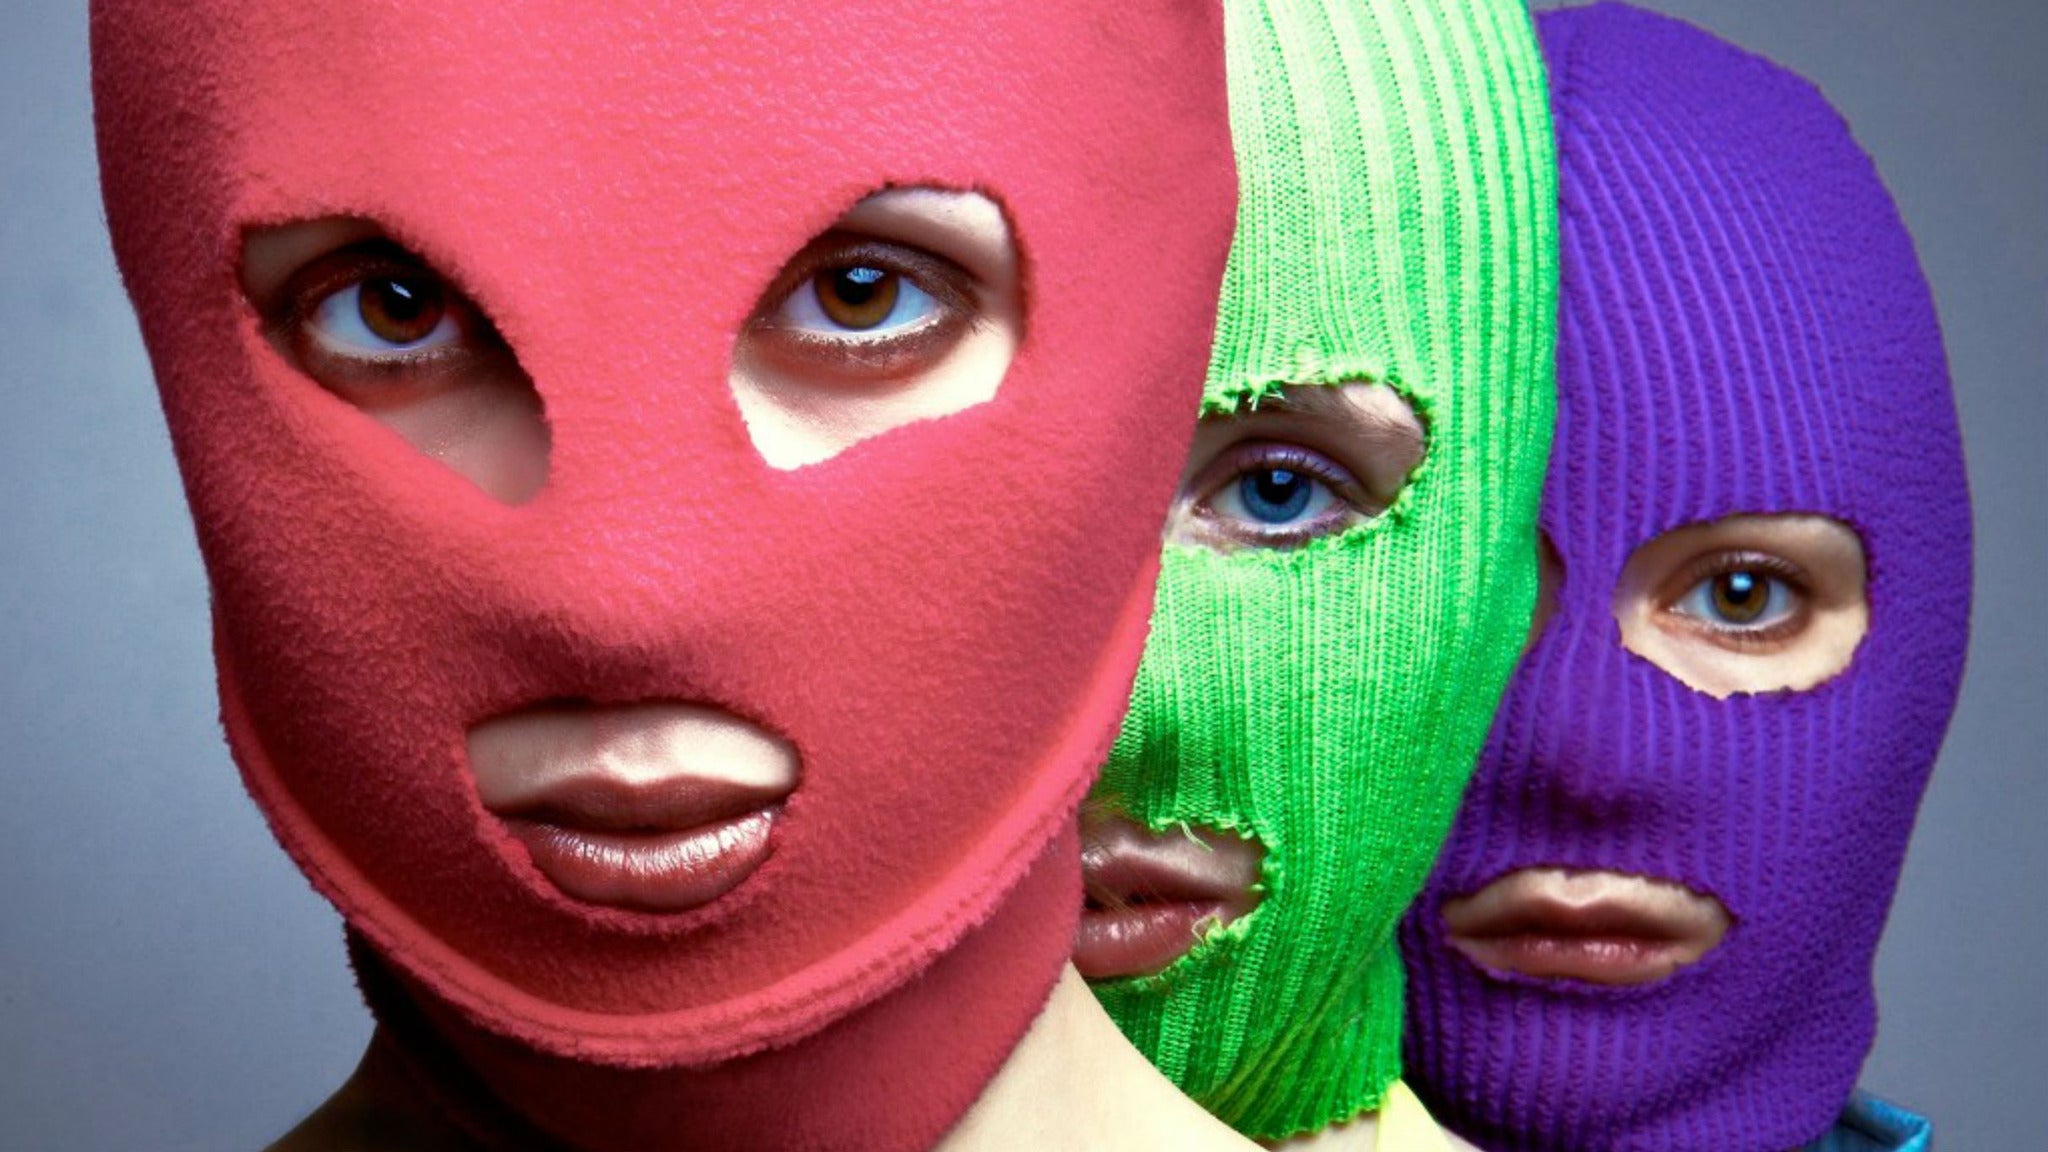 Pussy Riot in Los Angeles promo photo for Exclusive presale offer code